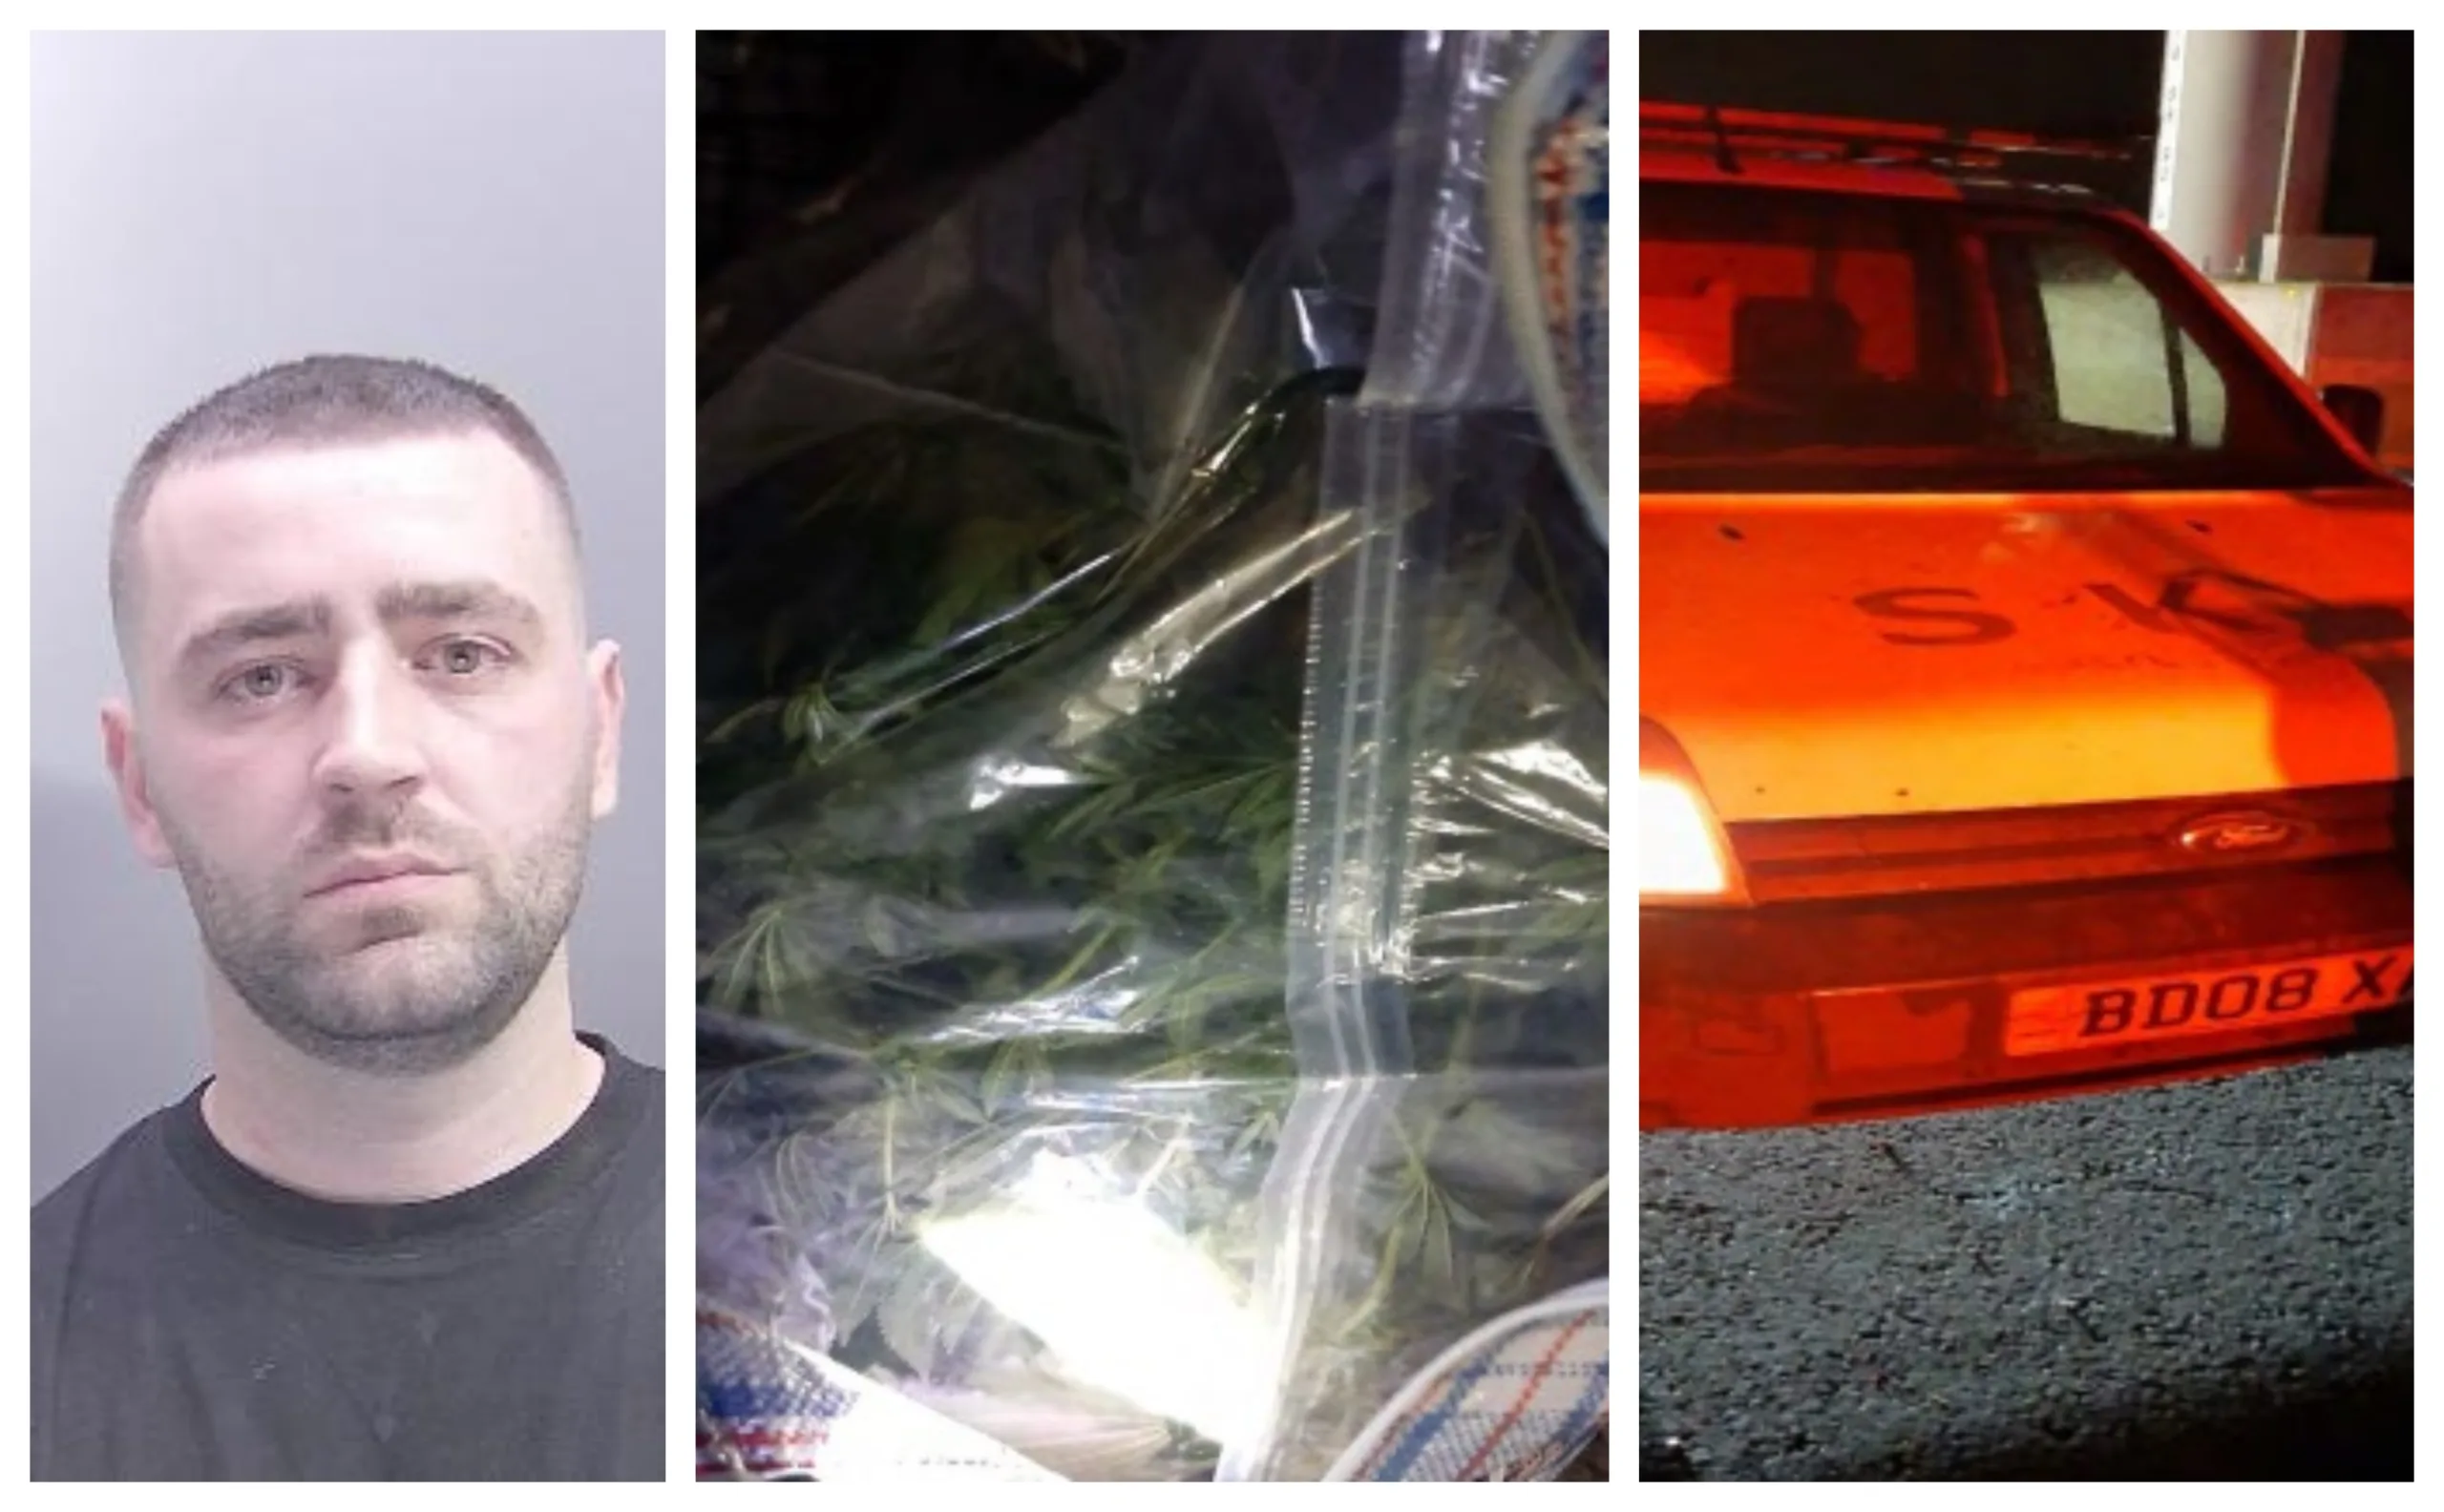 Iliran Sinani with the car he was driving and the drugs found in a laundry basket